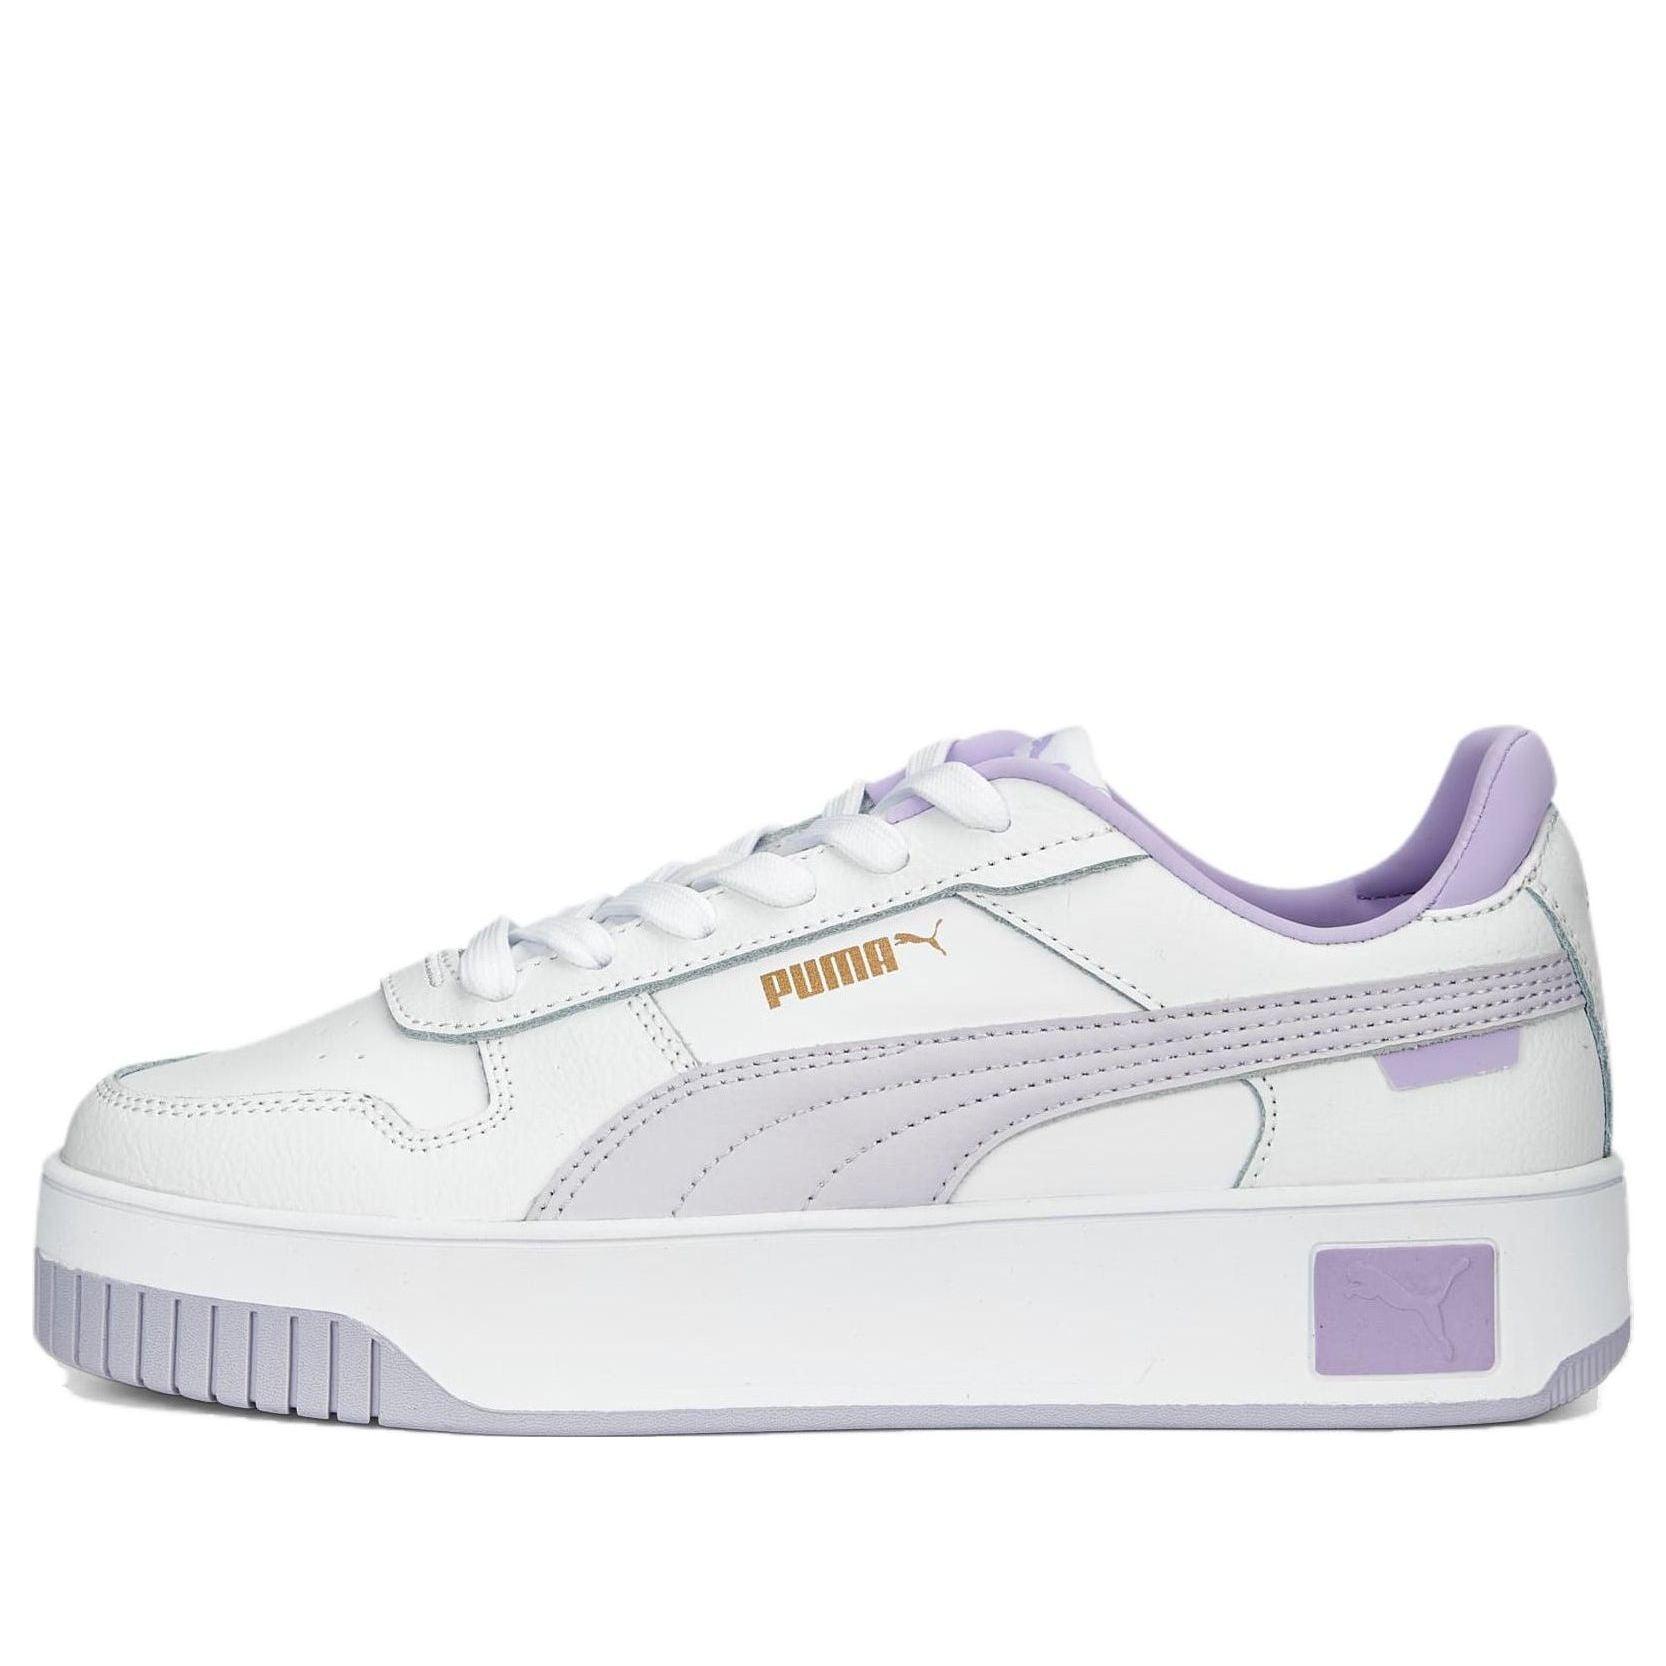 Carina Shoes 'purple' in White | Lyst